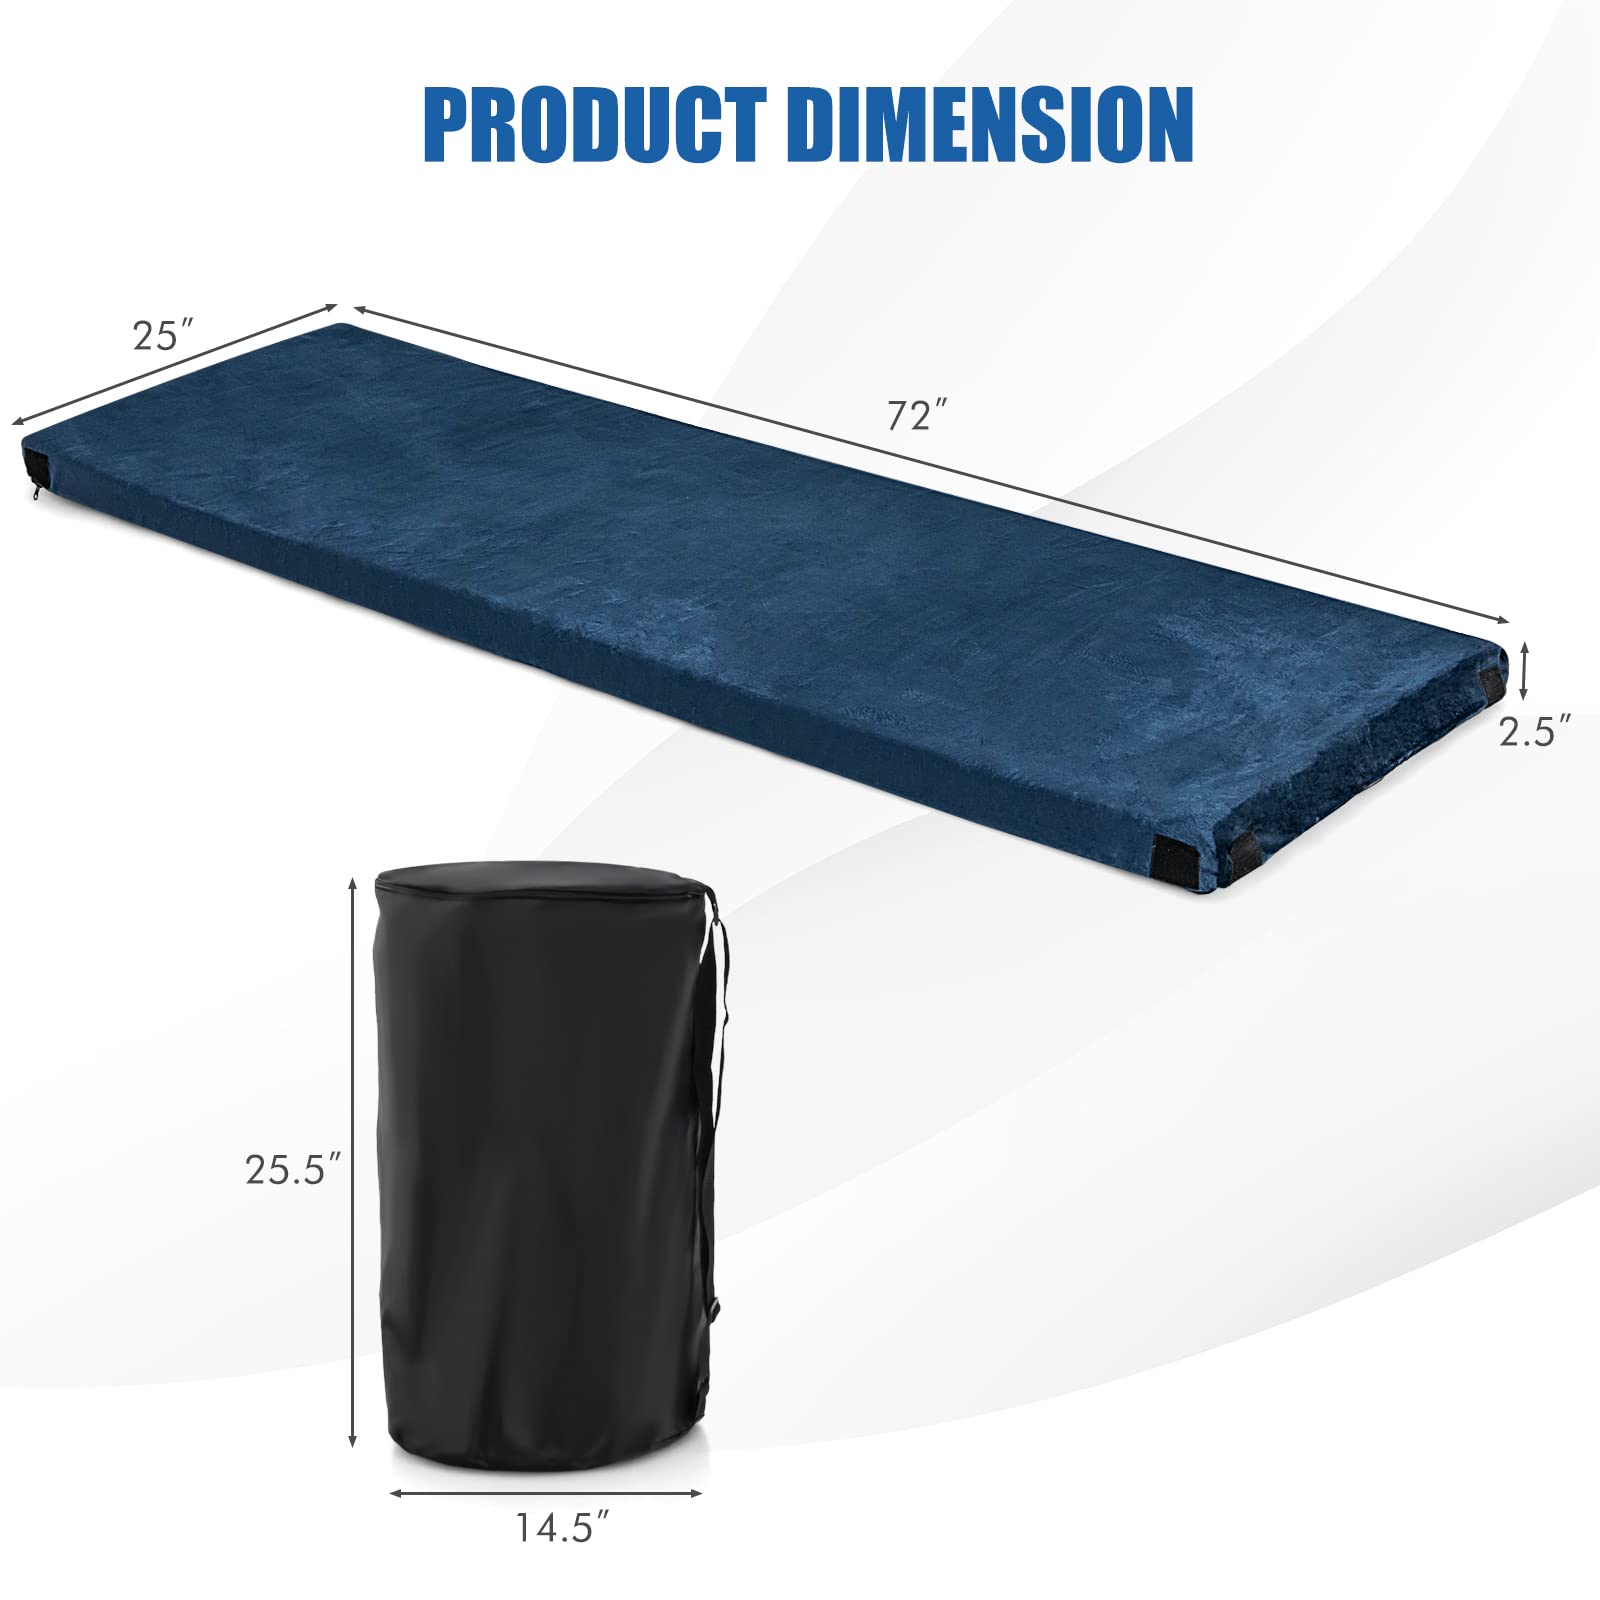 Giantex 72" Memory Foam Camping Mattress, Foldable Floor Guest Bed for Sleepover